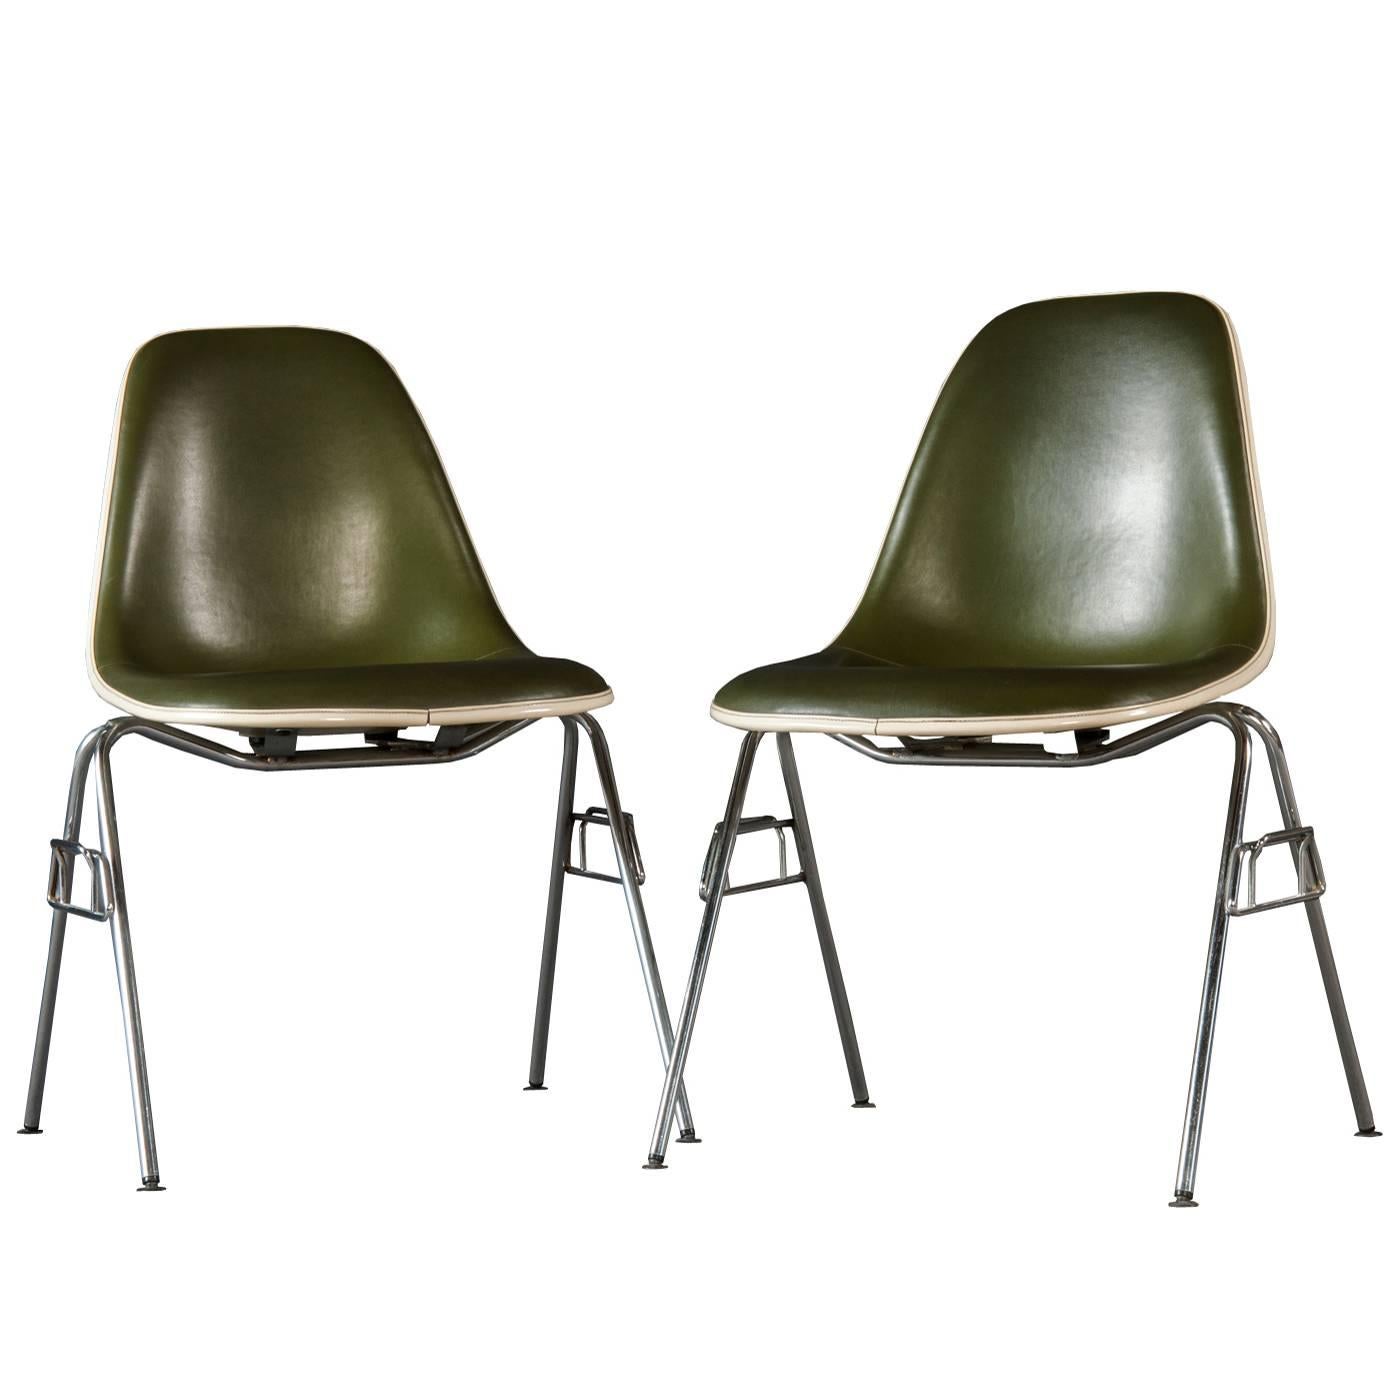 Model DSS Chair by Charles and Ray Eames